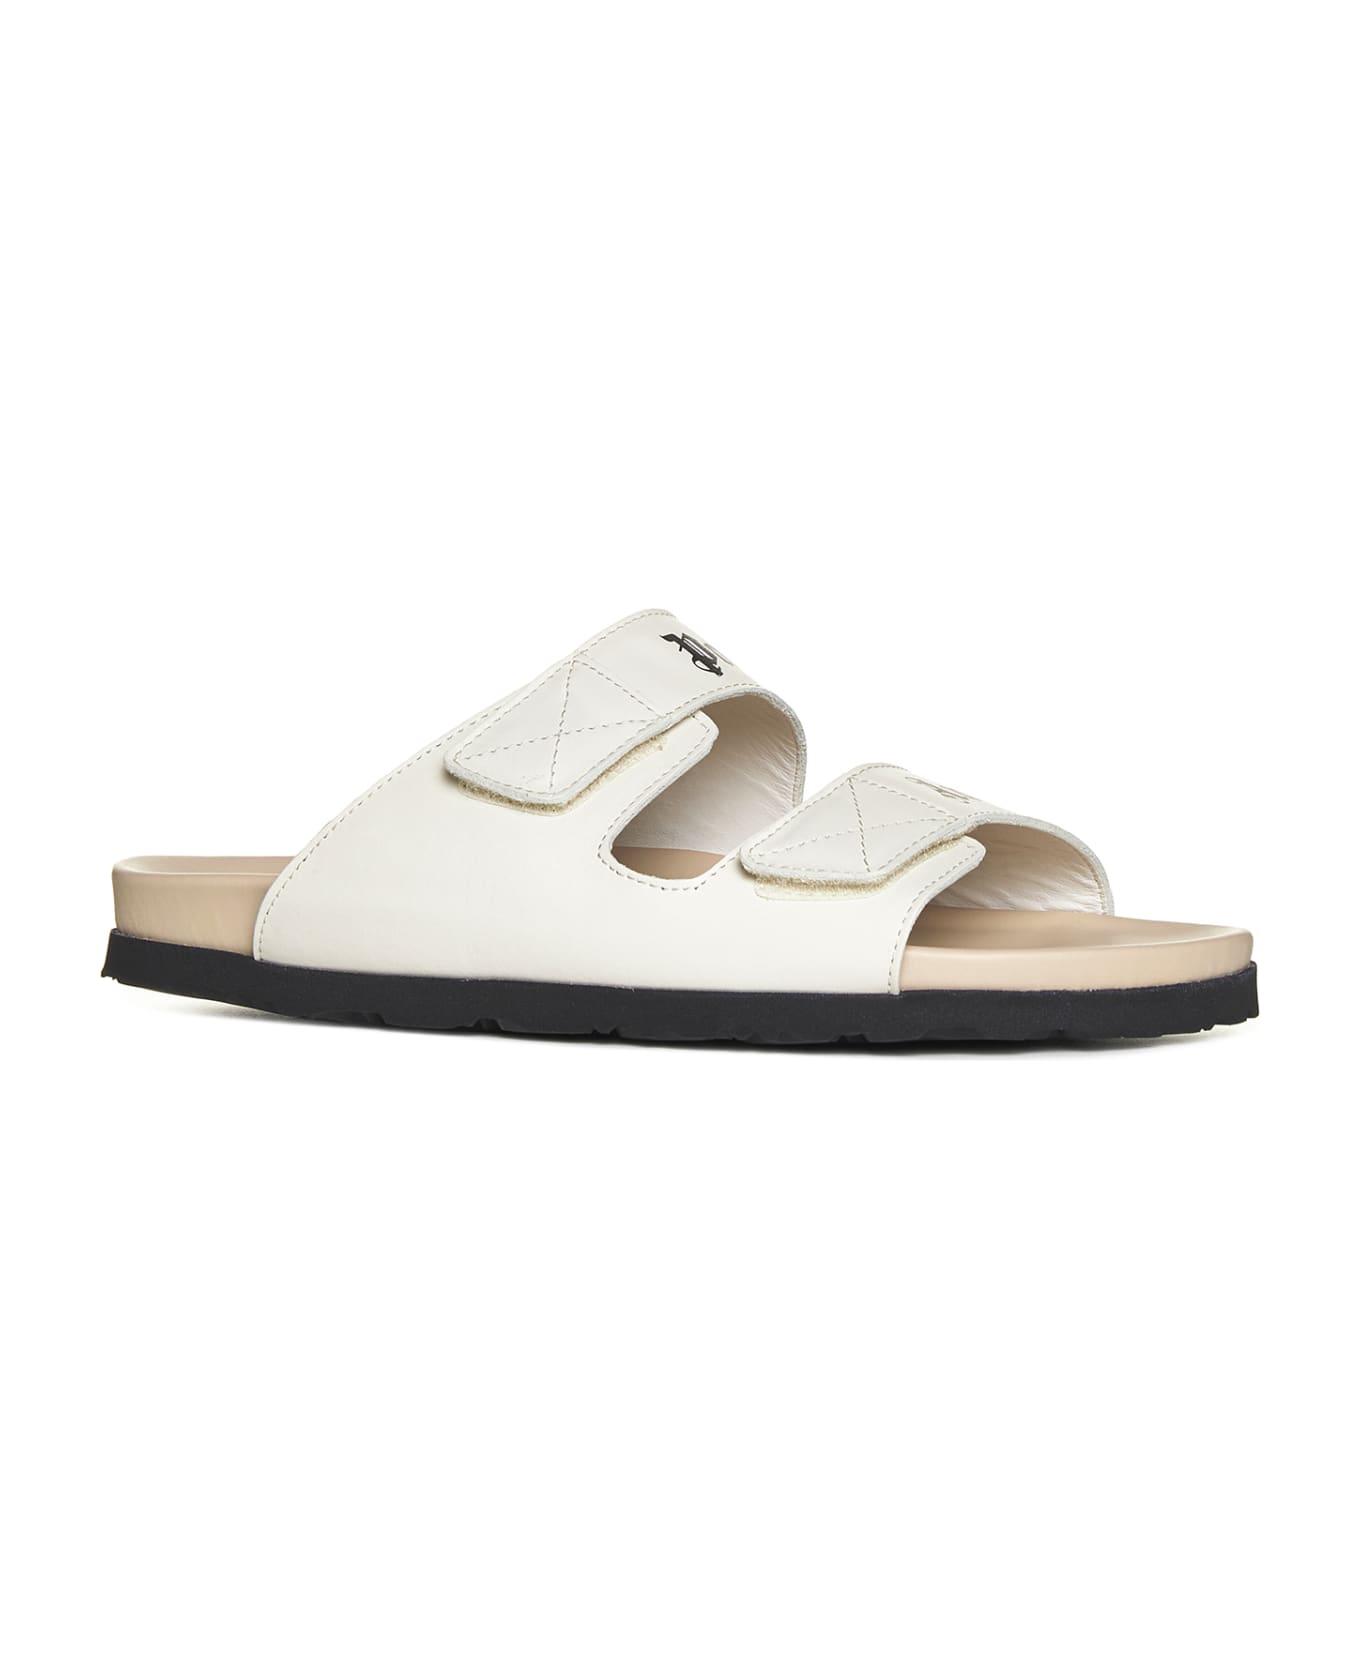 Palm Angels Leather Slides With Logo - Cream その他各種シューズ